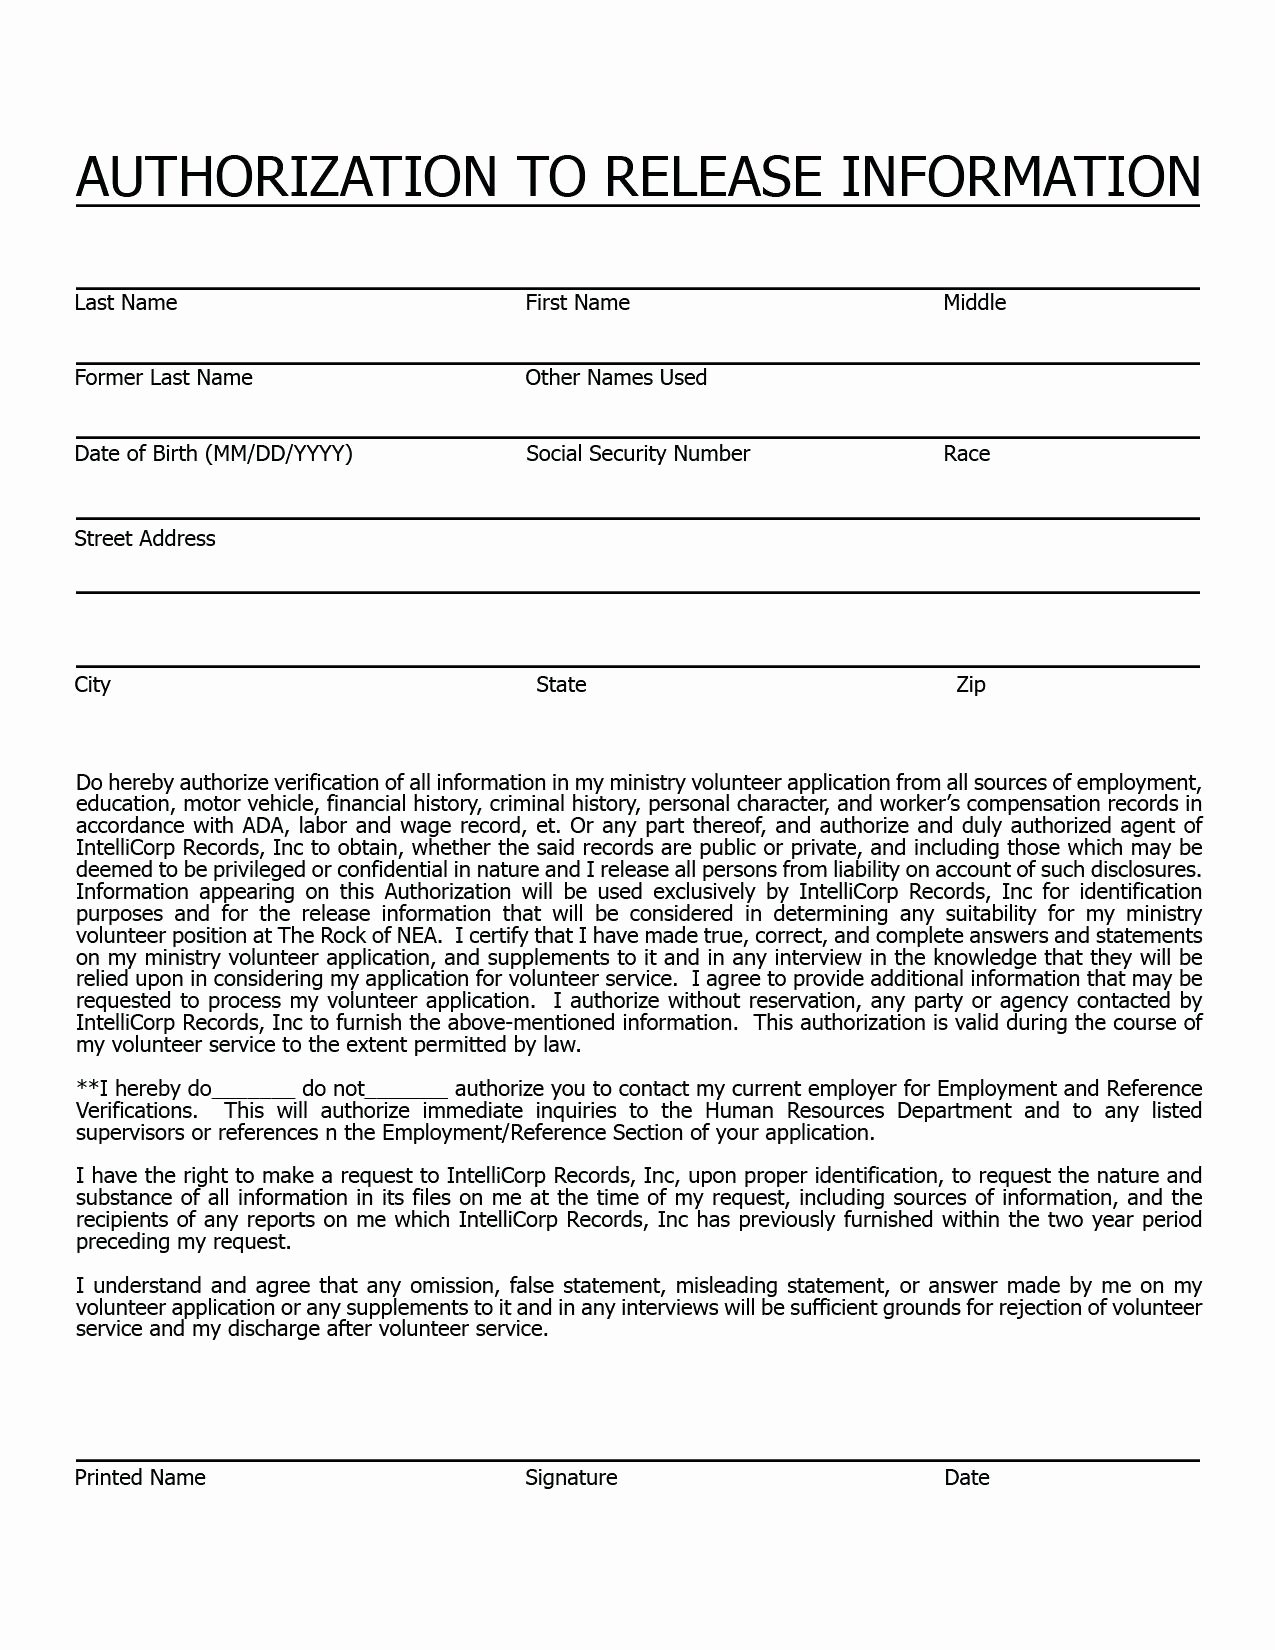 Background Check form Template Inspirational Template Authorization to Release Information form Template